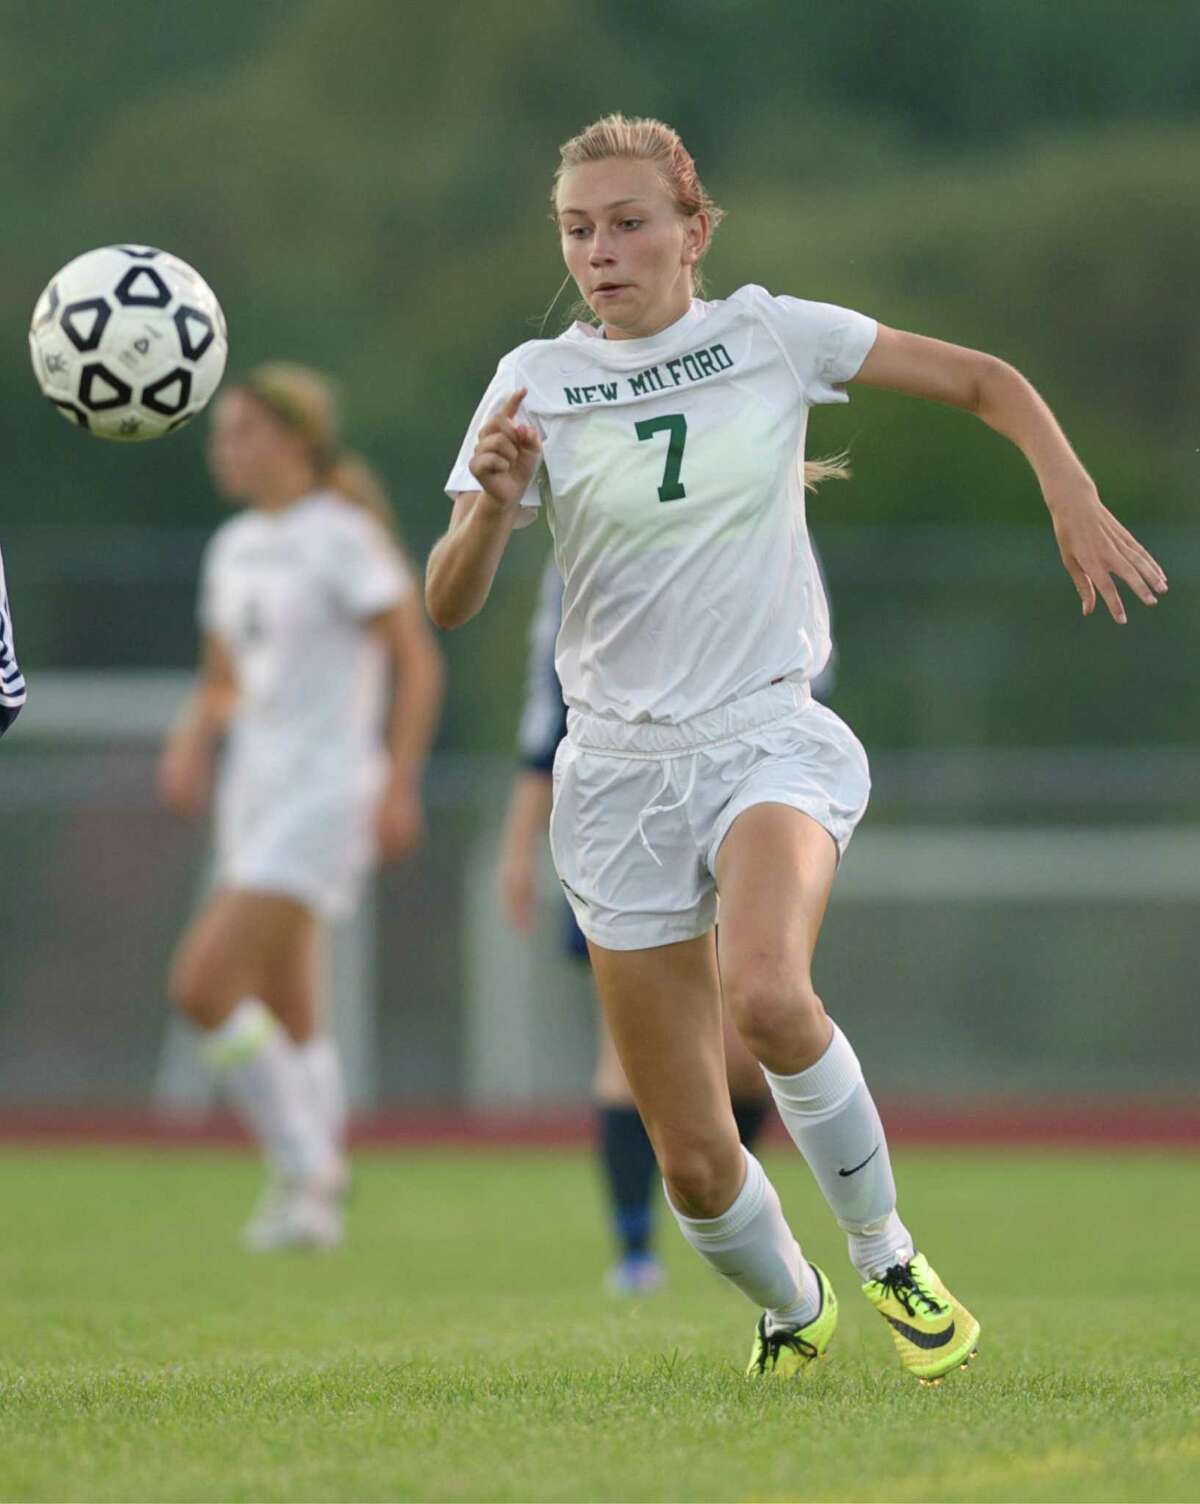 Jenna Barron (7) is one of several returning seniors on the New Milford High School girls soccer team as it looks to defend its SWC title this season.